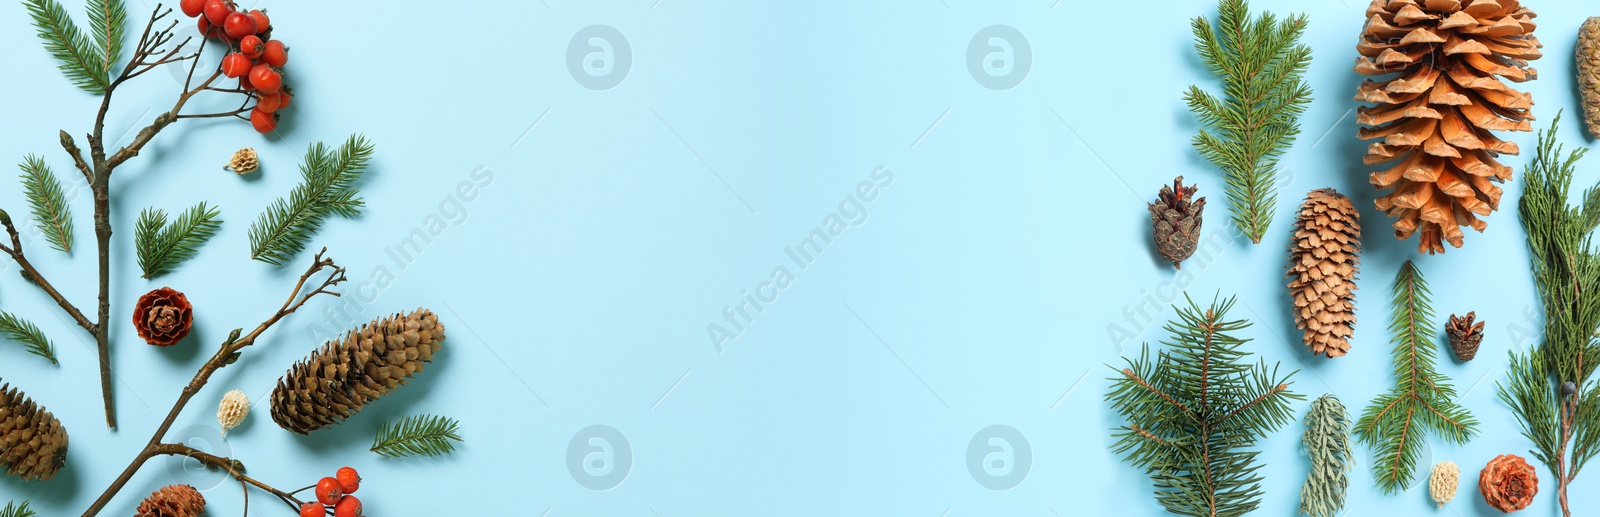 Image of Flat lay composition with pinecones on light blue background, space for text. Horizontal banner design